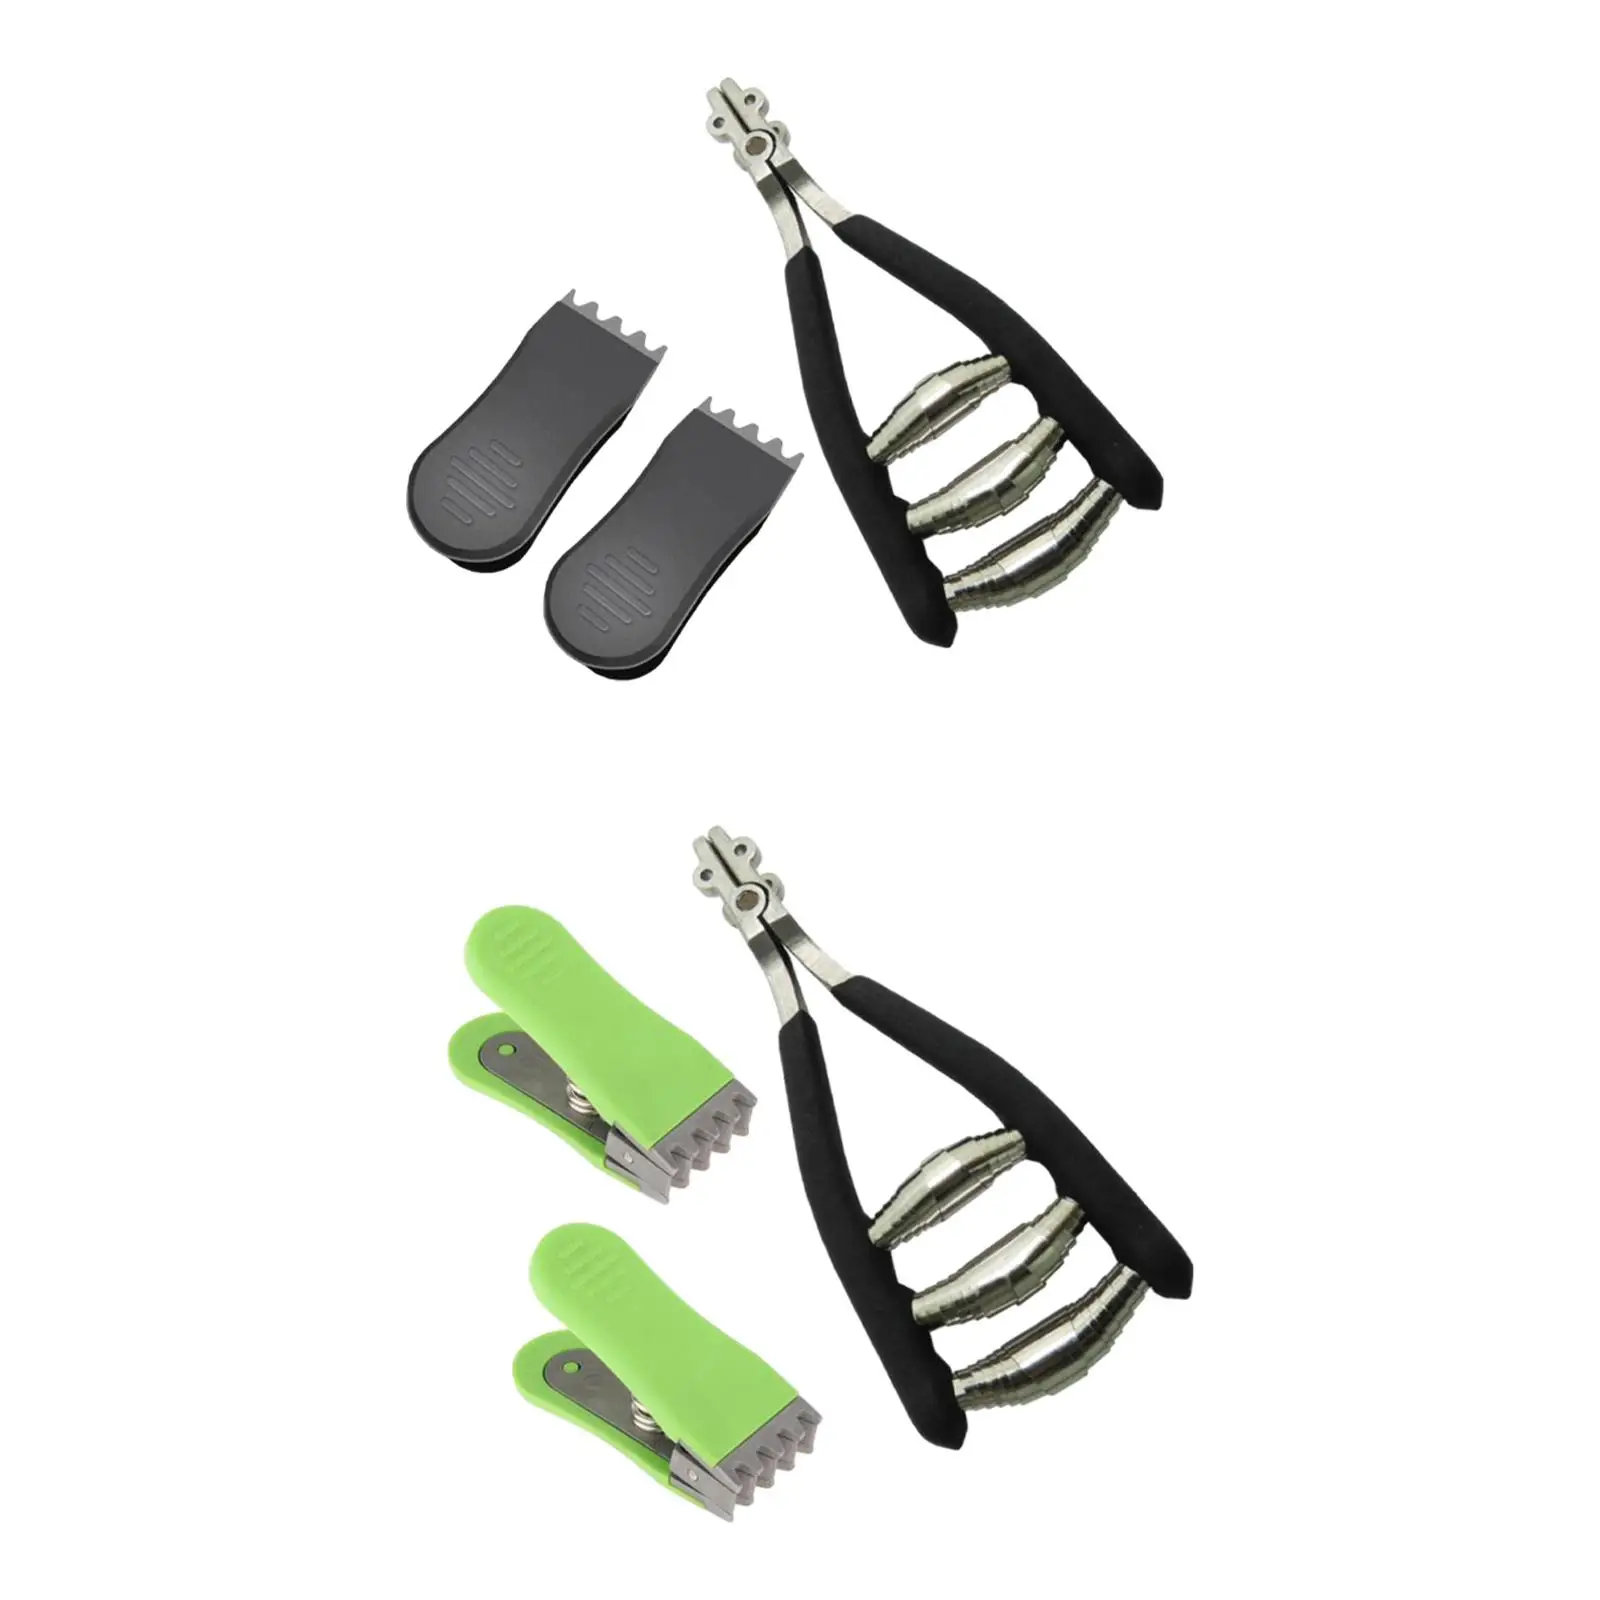 Starting Clamp with Flying Clip Accessories Wide Head 3 Spring Tennis Equipment Stringing Clamp for Tennis Racquet Squash Racket